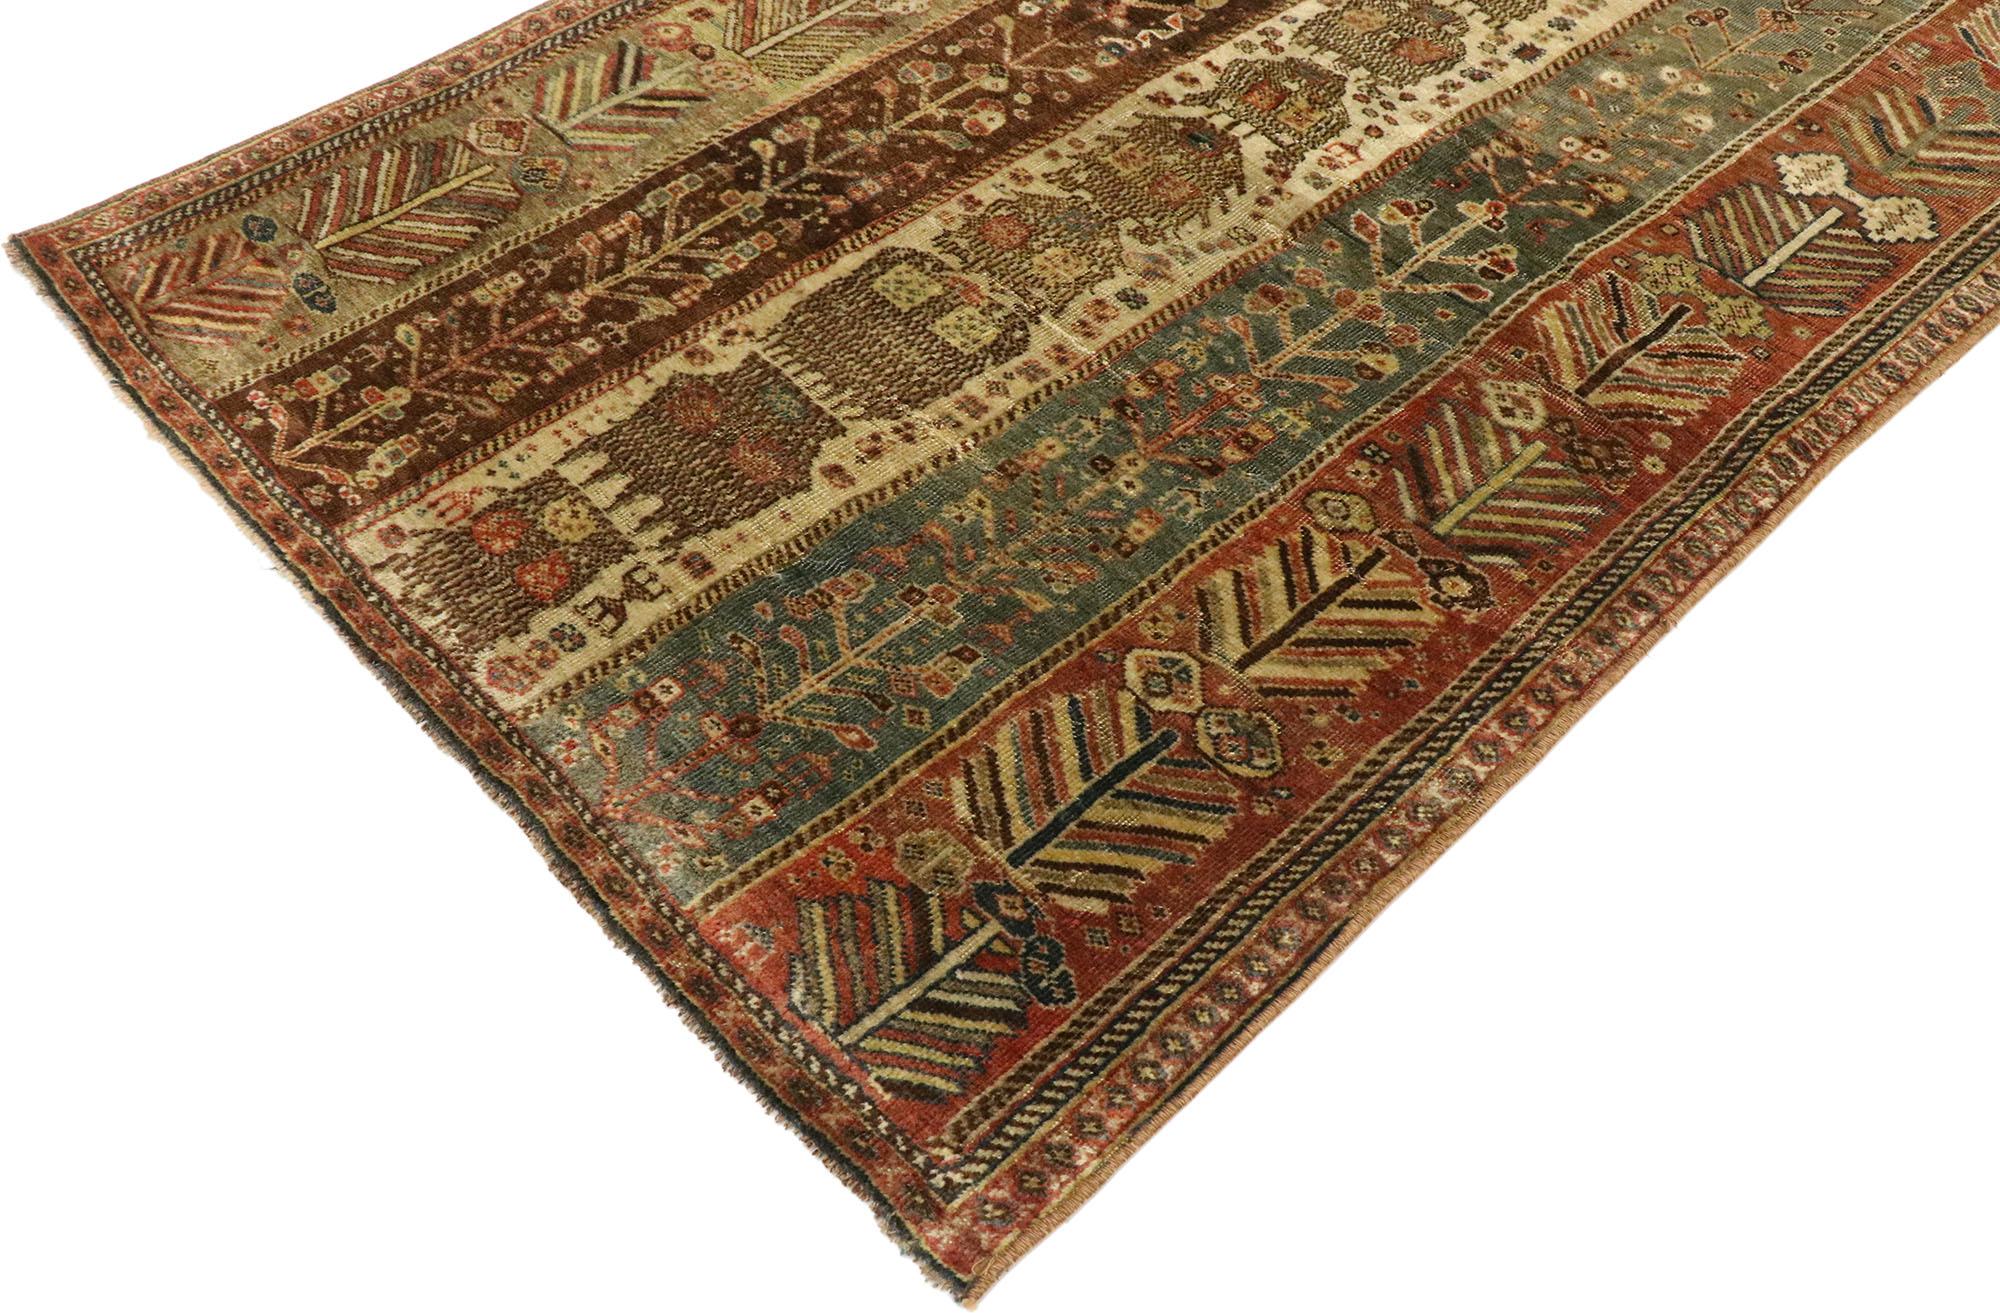 53089, vintage Turkish Oushak rug with Modern rustic tribal style. Imbued with charm and earthy-inspired colors, this hand-knotted wool vintage Turkish Oushak rug balances traditional sensibility and tribal style. The abrashed composition features